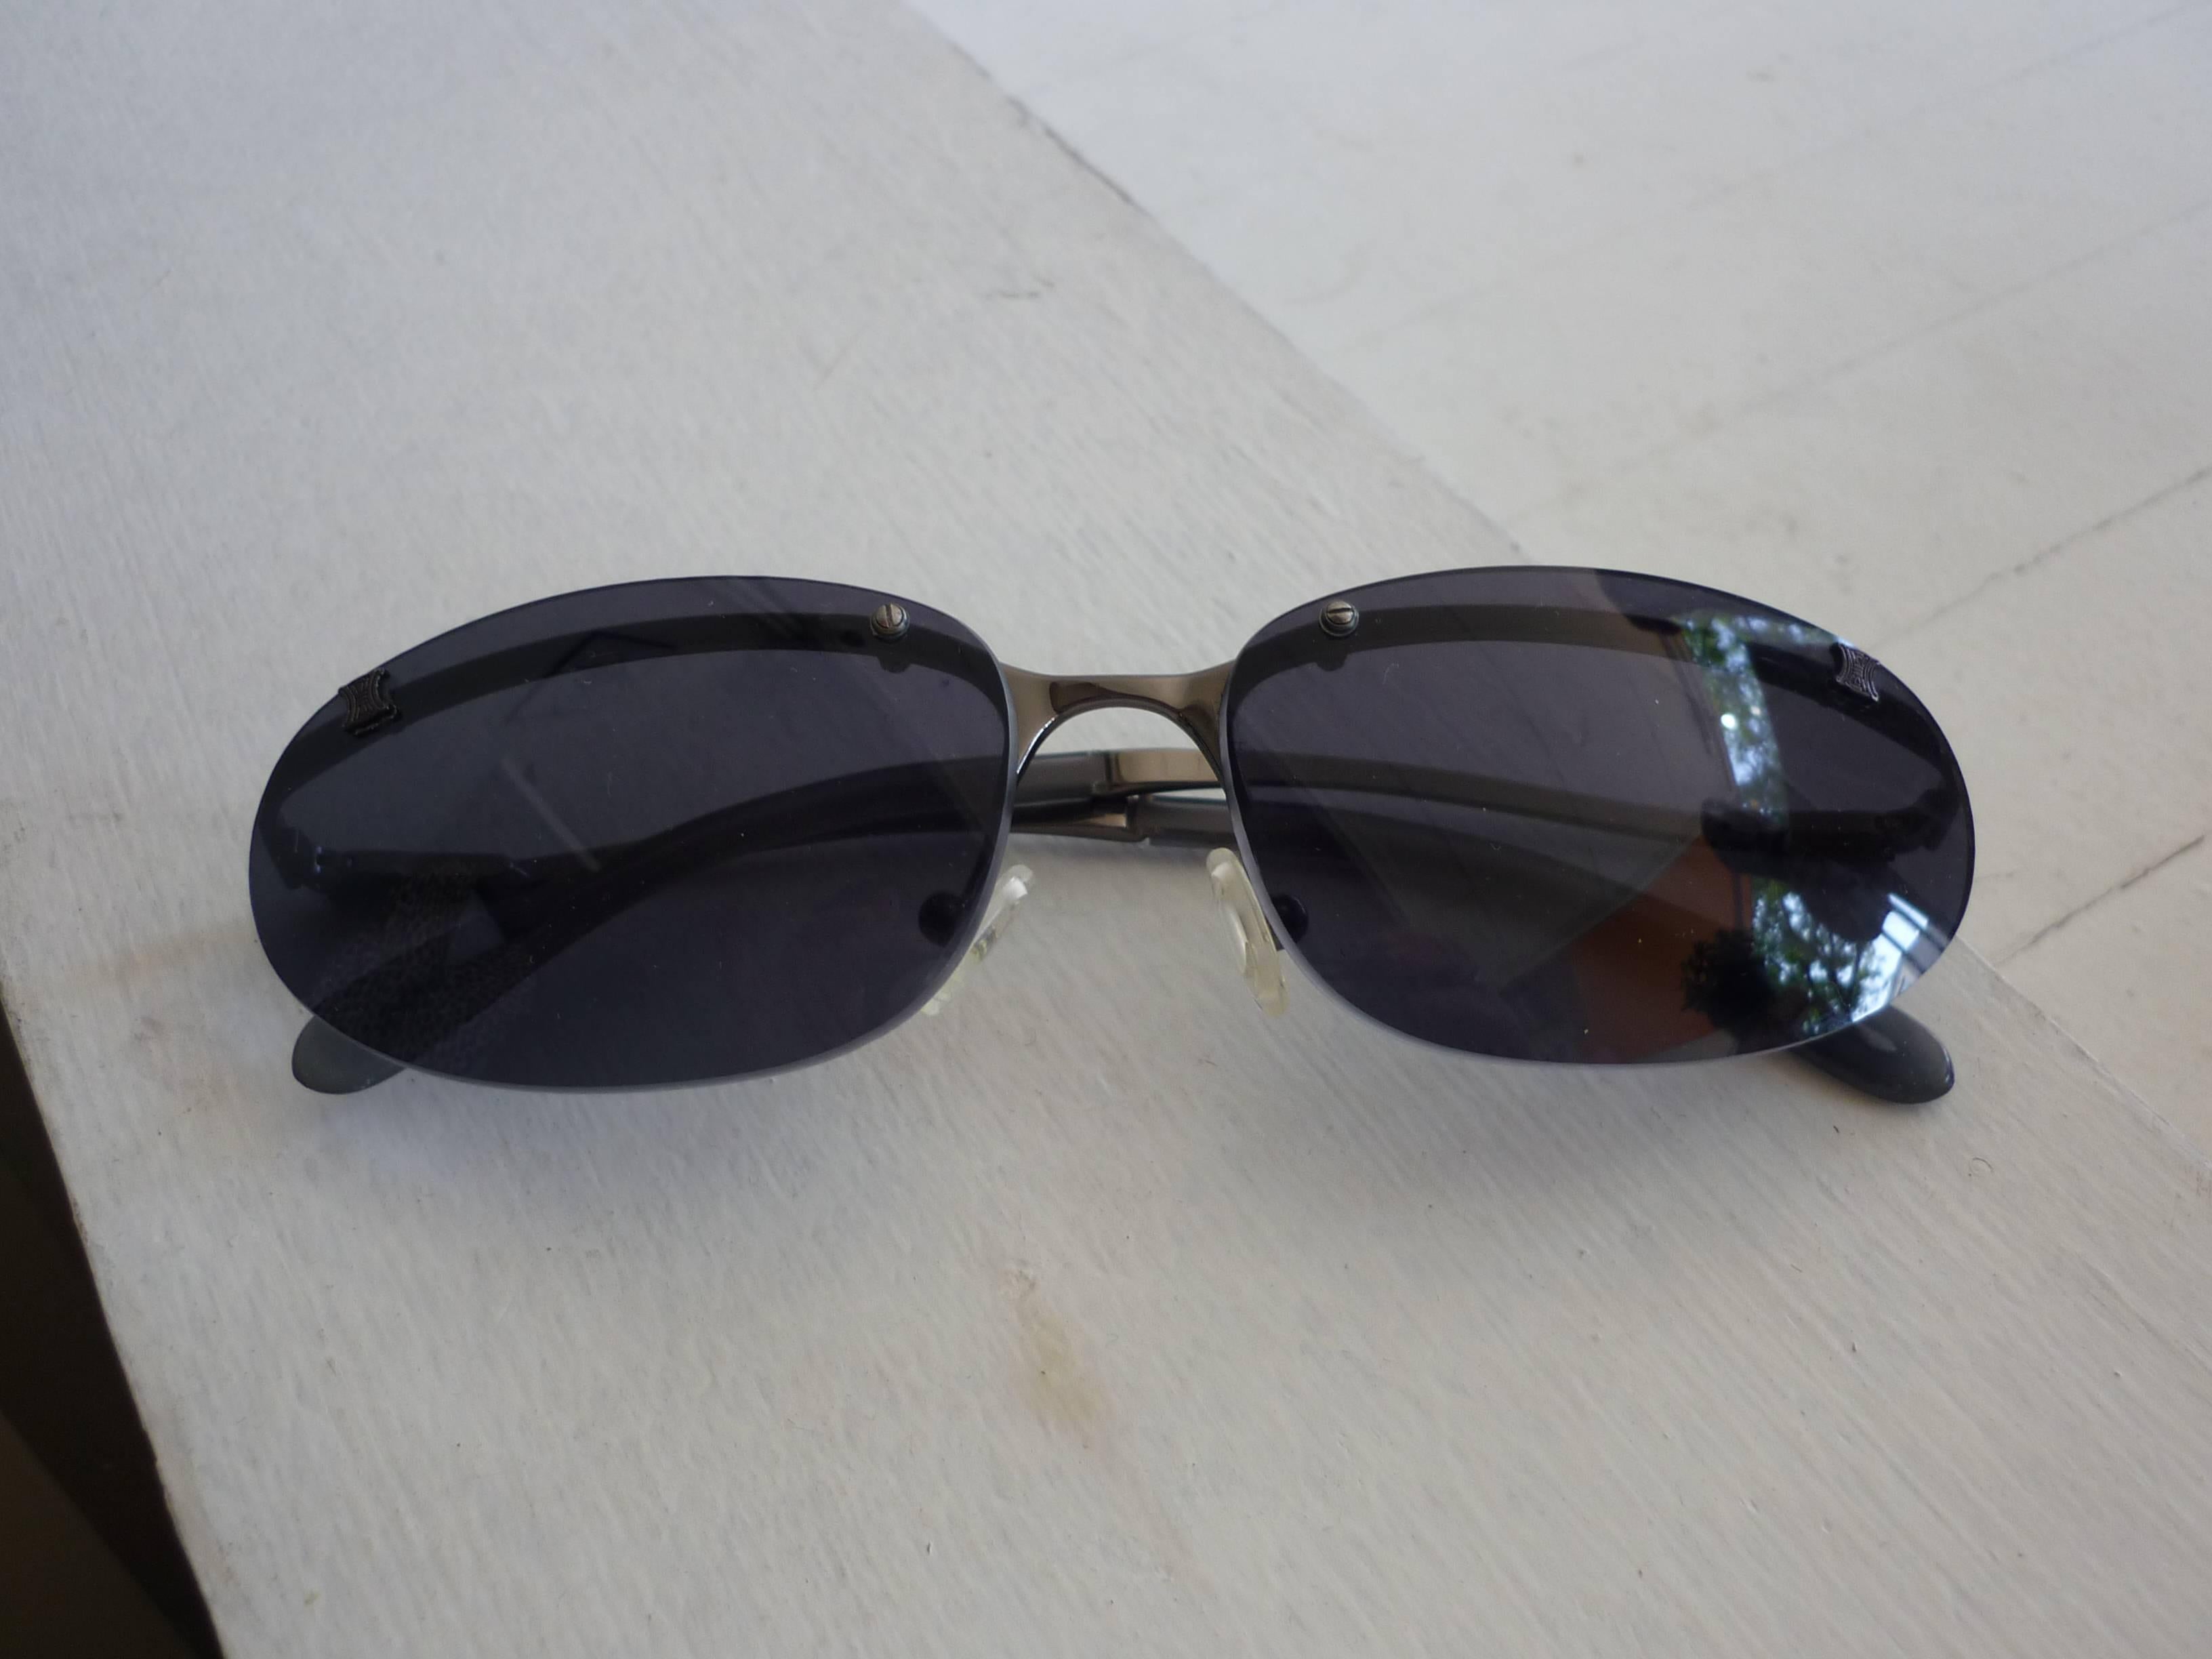 Lovely discontinued line, these Celine sunglasses look rimless as the rim is affixed to the inside. A silver raised Celine logo is found at the top of each lense, and incised on half of the arms in grey. The color of the lenses is grey.

The